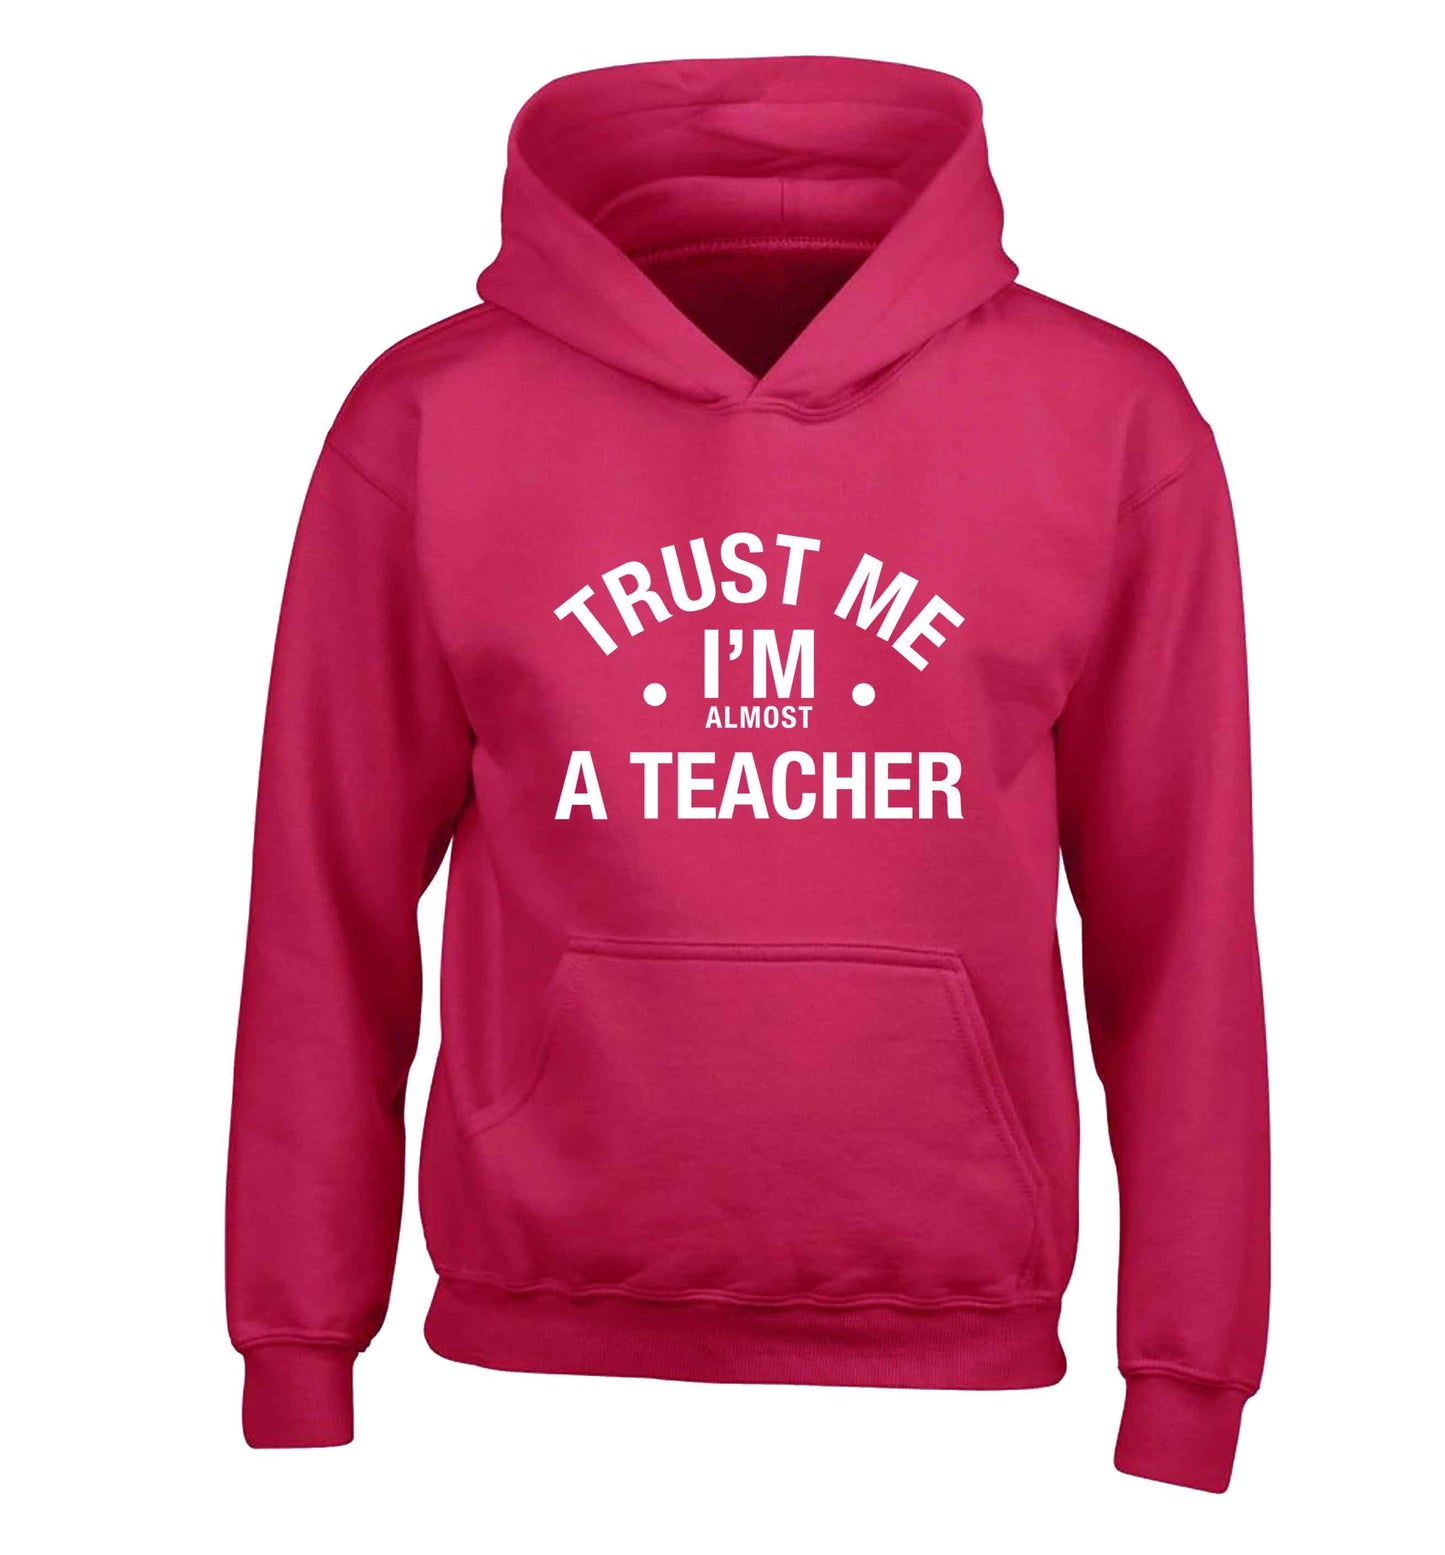 Trust me I'm almost a teacher children's pink hoodie 12-13 Years